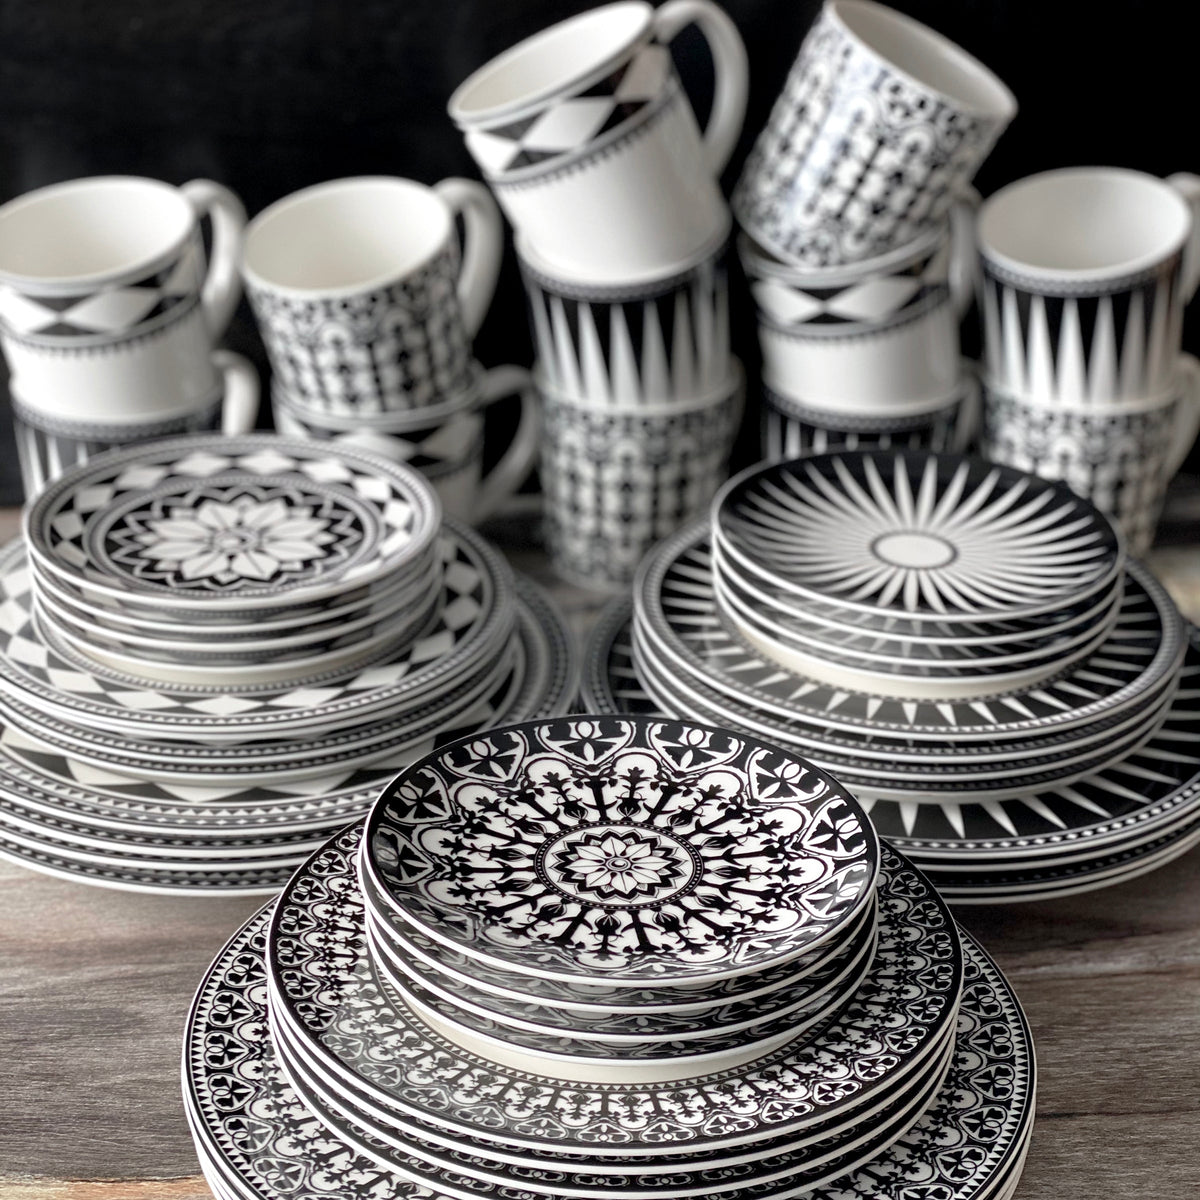 A set of black and white Casablanca 4-Piece Place Setting plates and cups on a table, evoking the timeless romance of Caskata Artisanal Home.